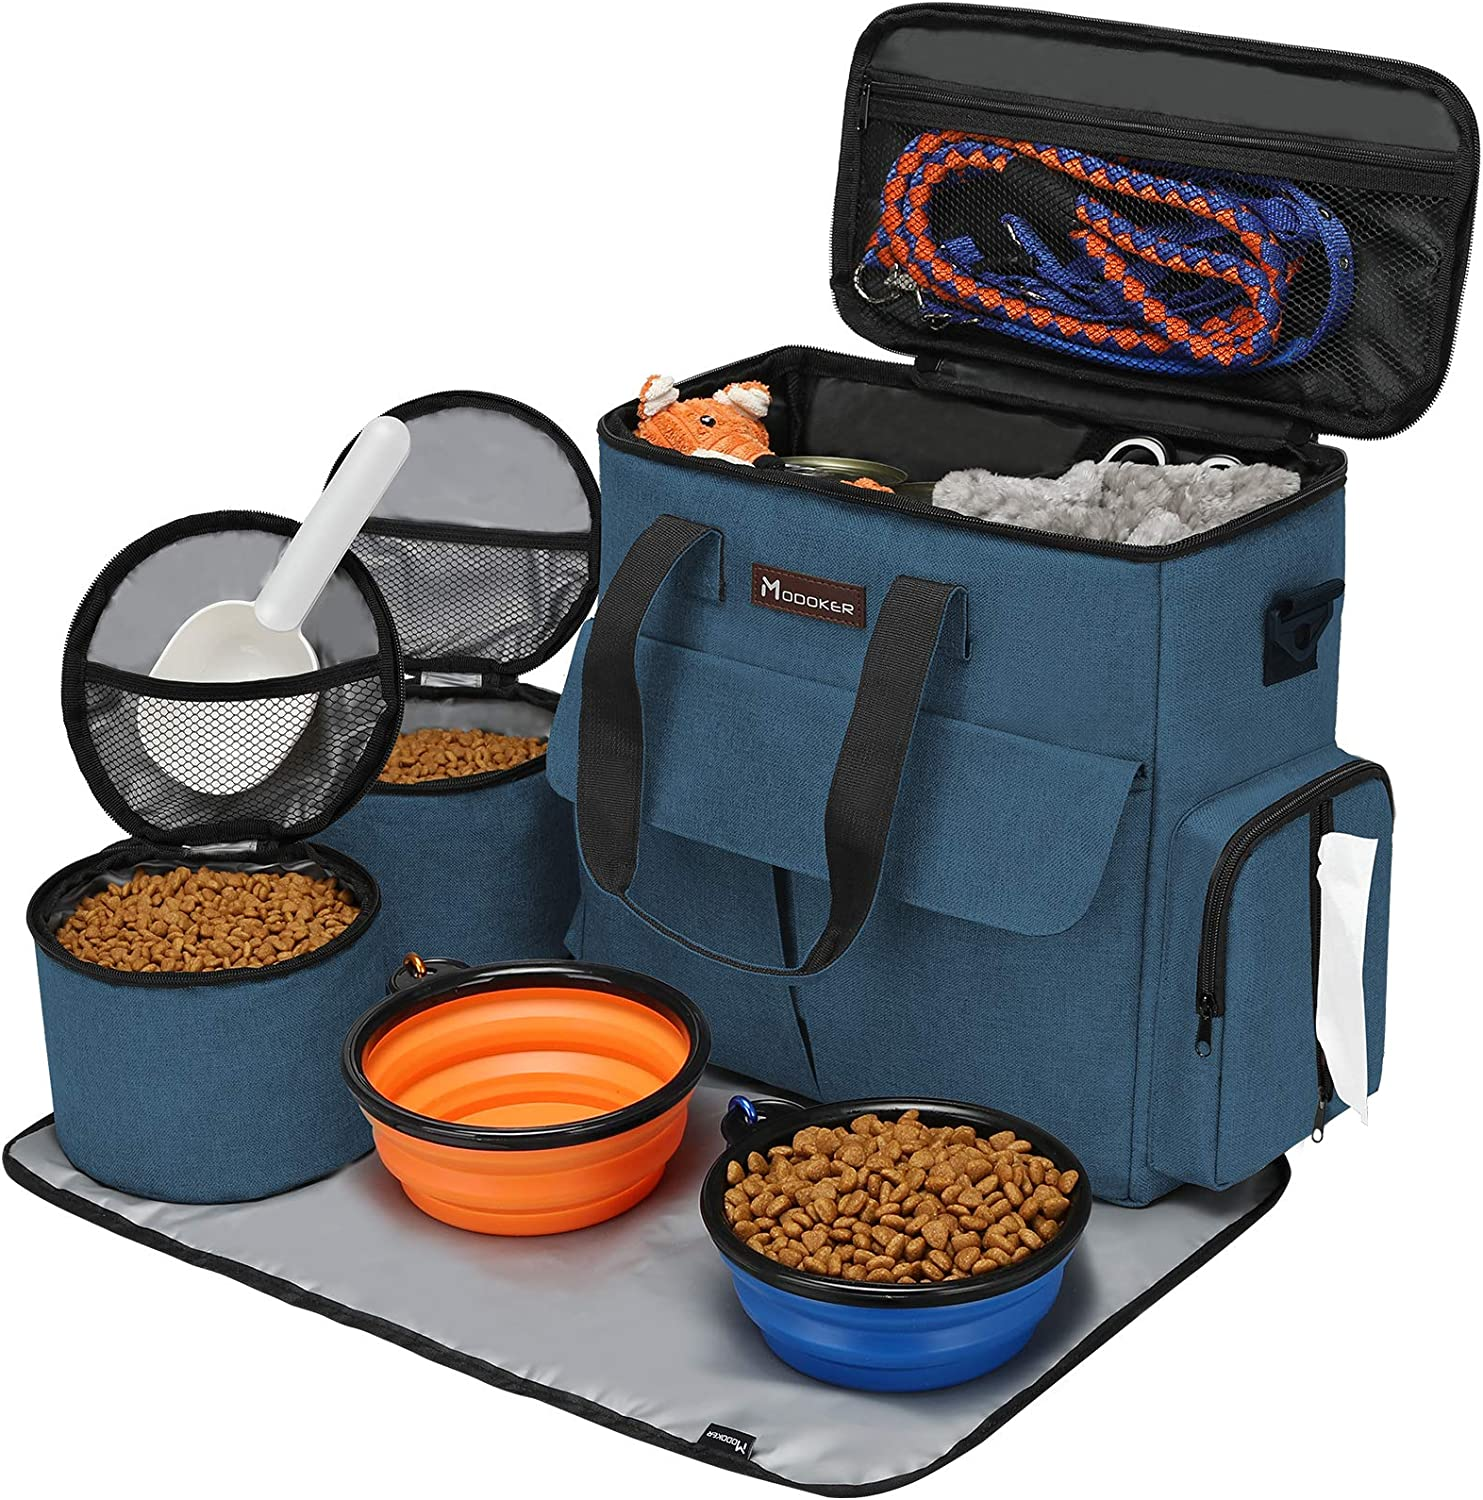 Modoker Dog Travel Bag, Weekend Pet Travel Set for Dog and Cat, Airline Approved Tote Organizer with Multi-Function Pockets, 2 Food Storage Containers, 2 Collapsible Bowls, 1 Feeding Mat (Blue)